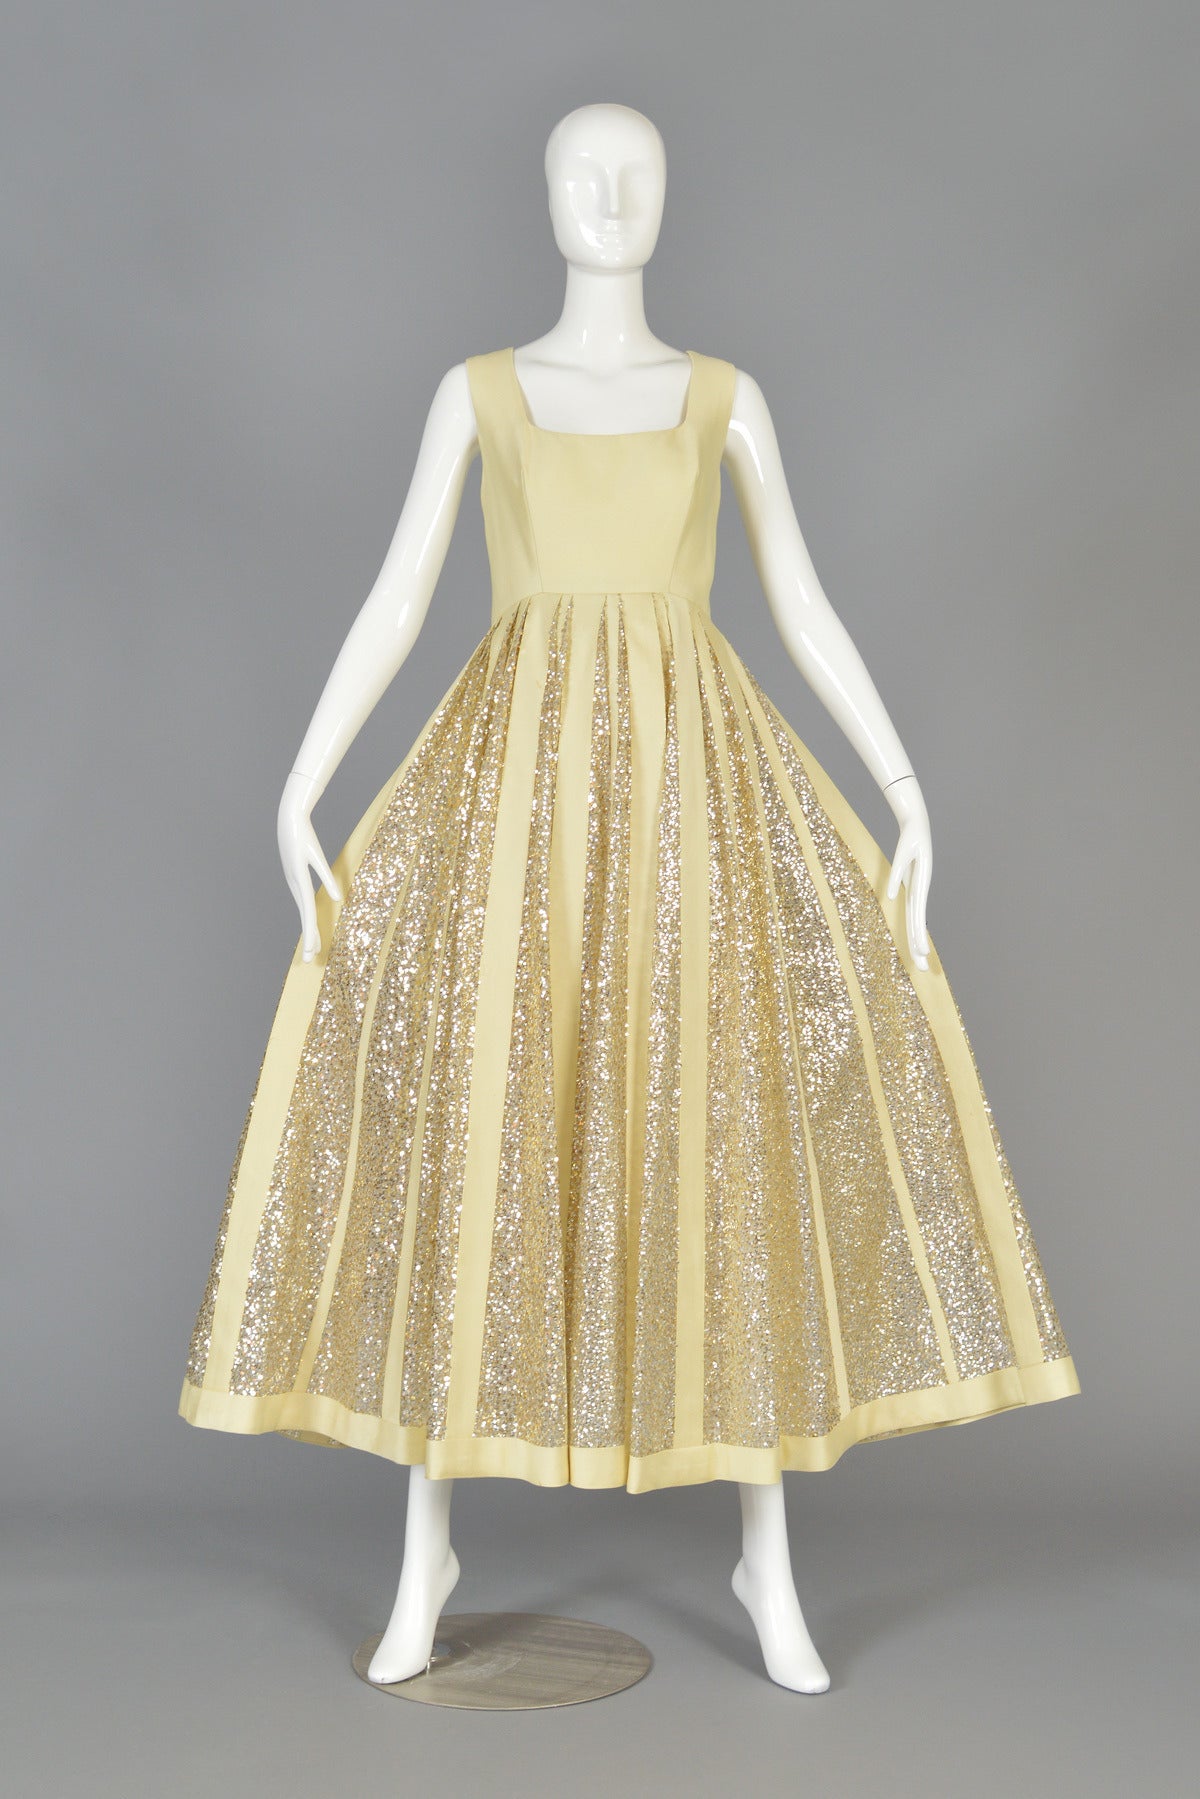 Absolutely beautiful 1960's evening dress. Such an incredible piece. Pale shimmery gold silk shantung and contrasting silvery sequins! Fitted bodice with squared neck and massive full skirt. The construction of the skirt is particularly interesting